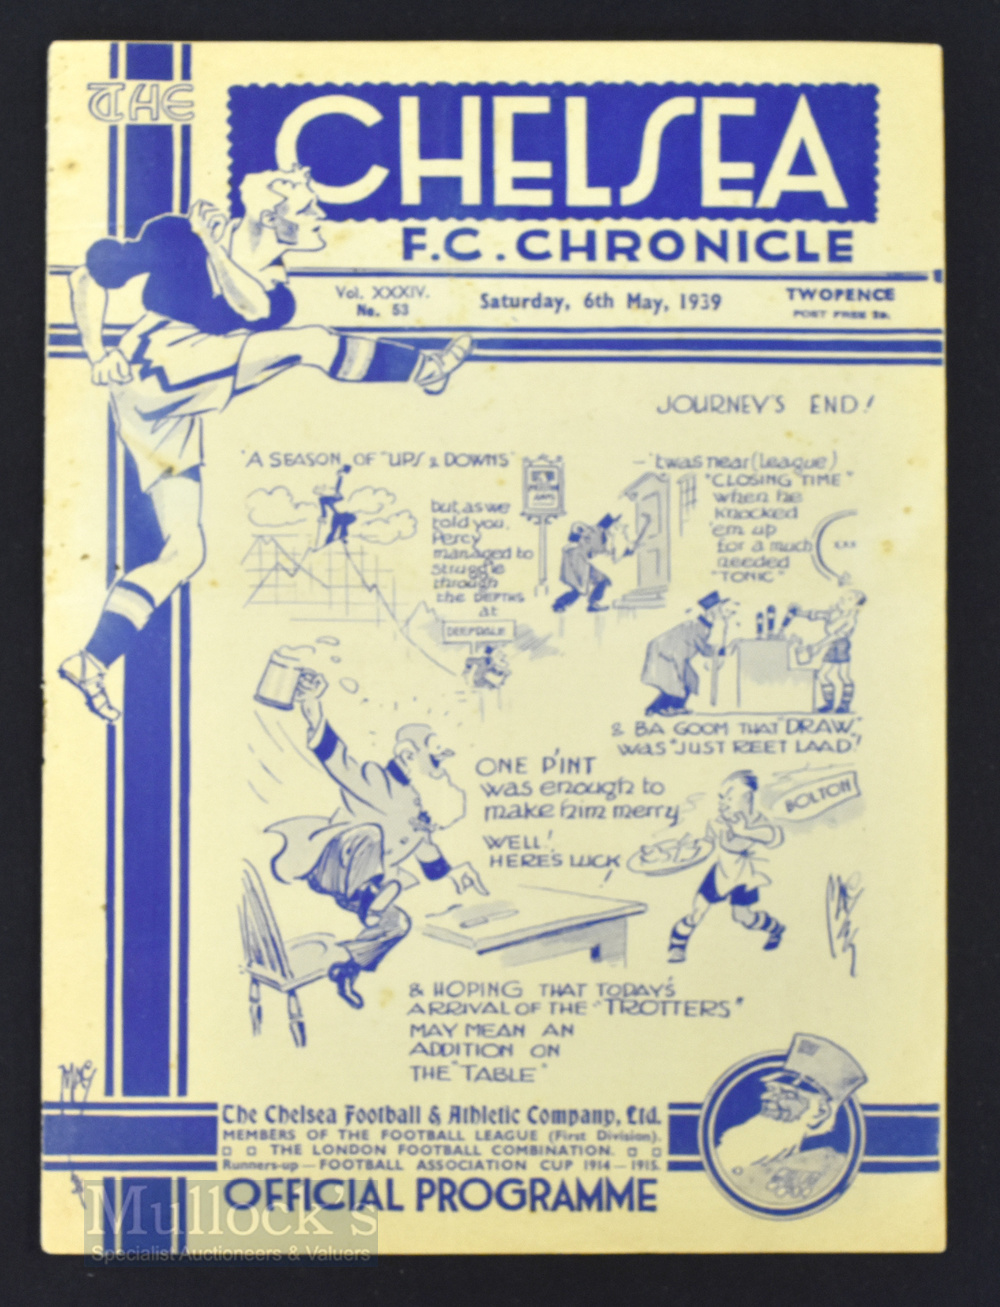 1938/39 Chelsea v Bolton Wanderers Div. 1 match programme 6 May 1939; the final official pre-war